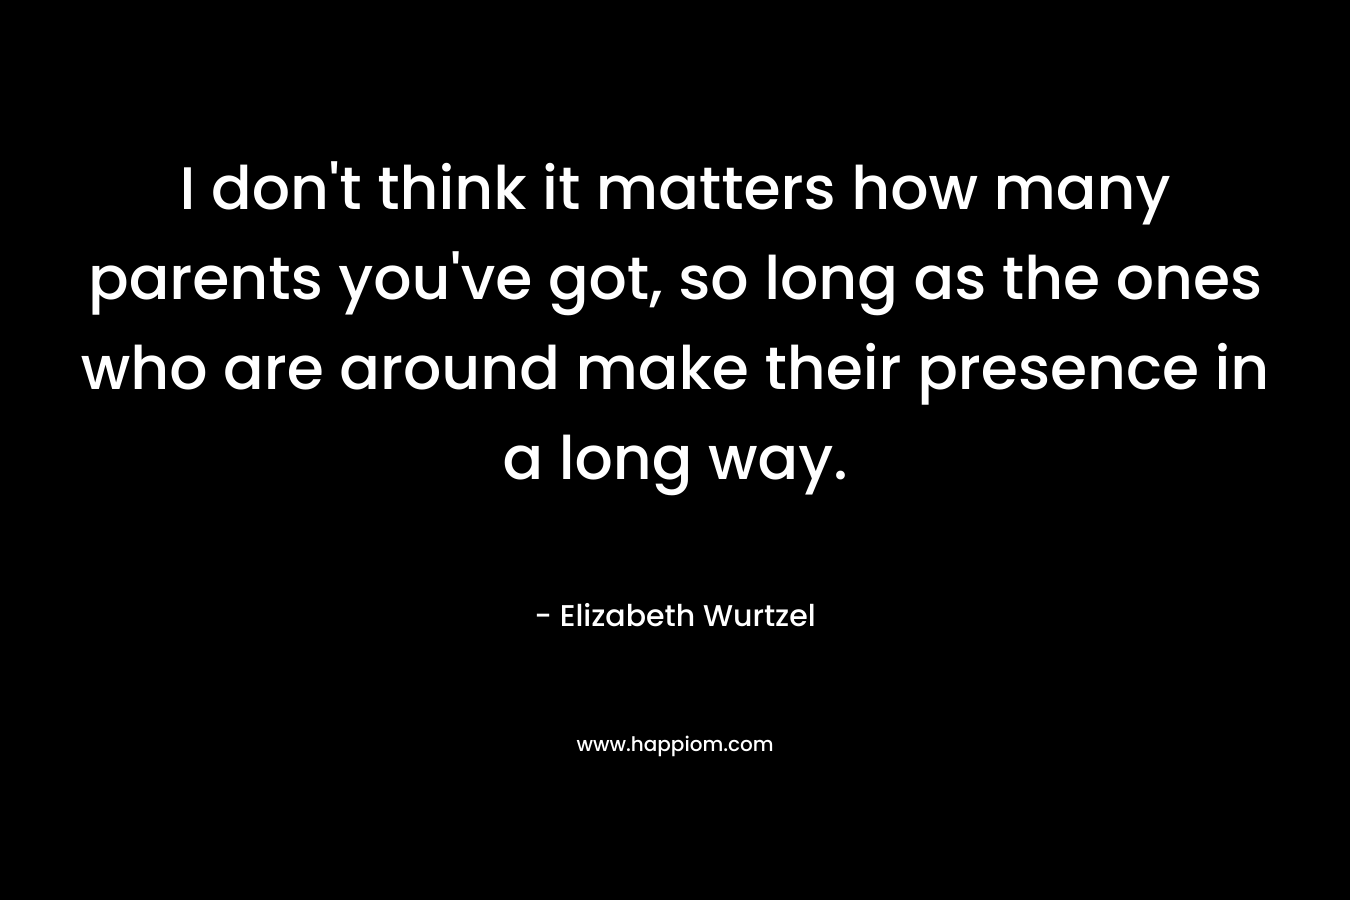 I don’t think it matters how many parents you’ve got, so long as the ones who are around make their presence in a long way. – Elizabeth Wurtzel